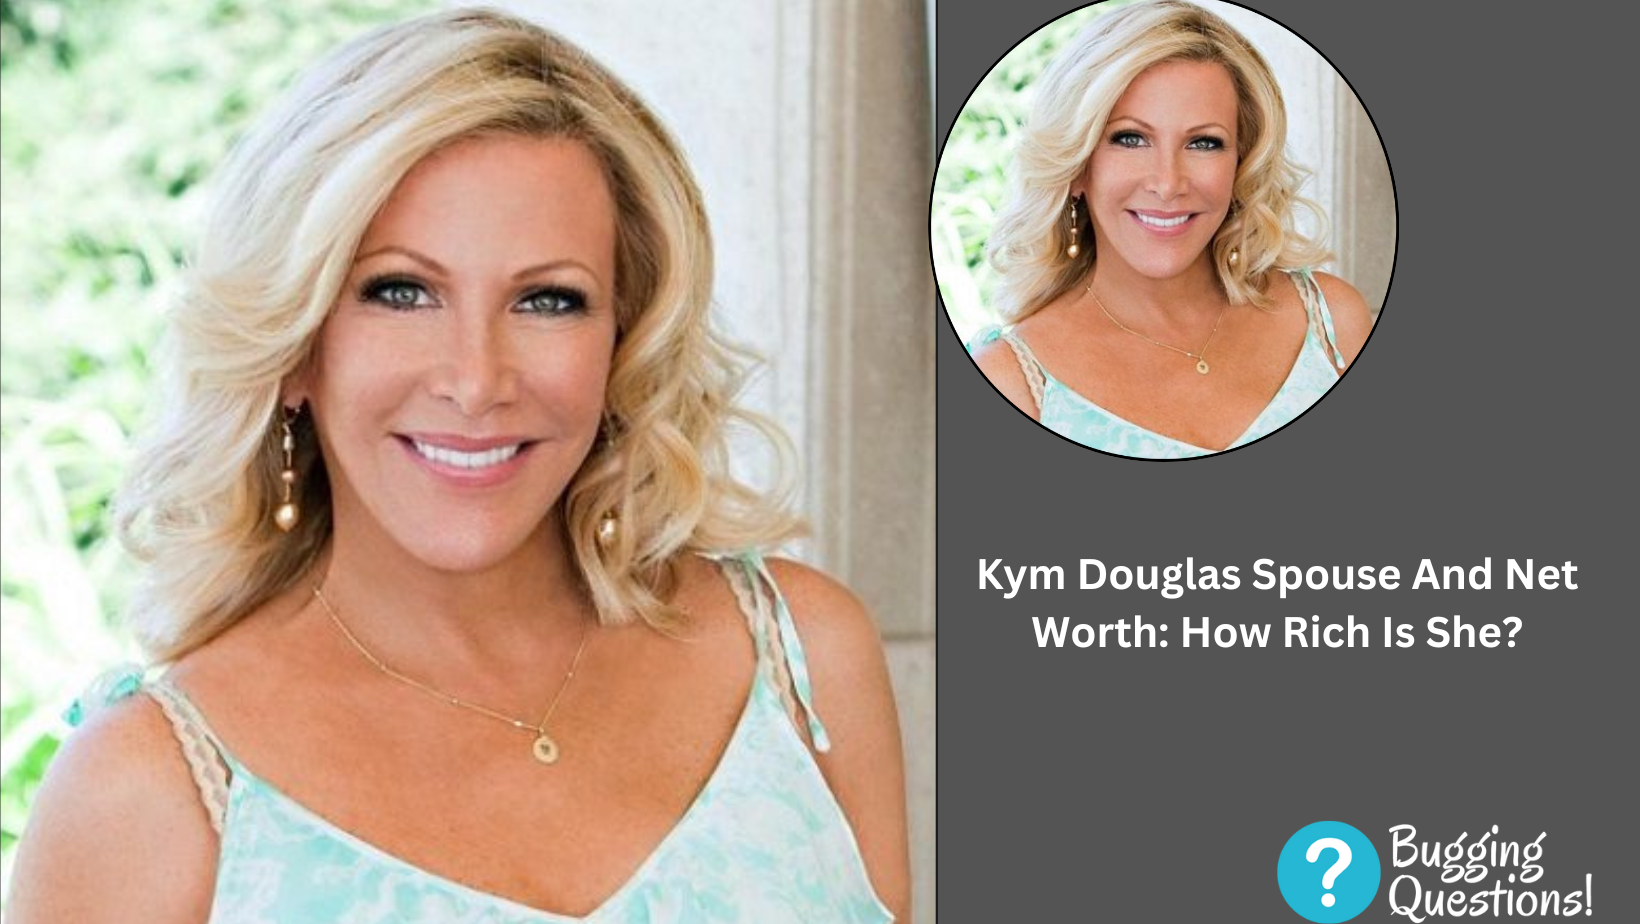 Kym Douglas Spouse And Net Worth: How Rich Is She?